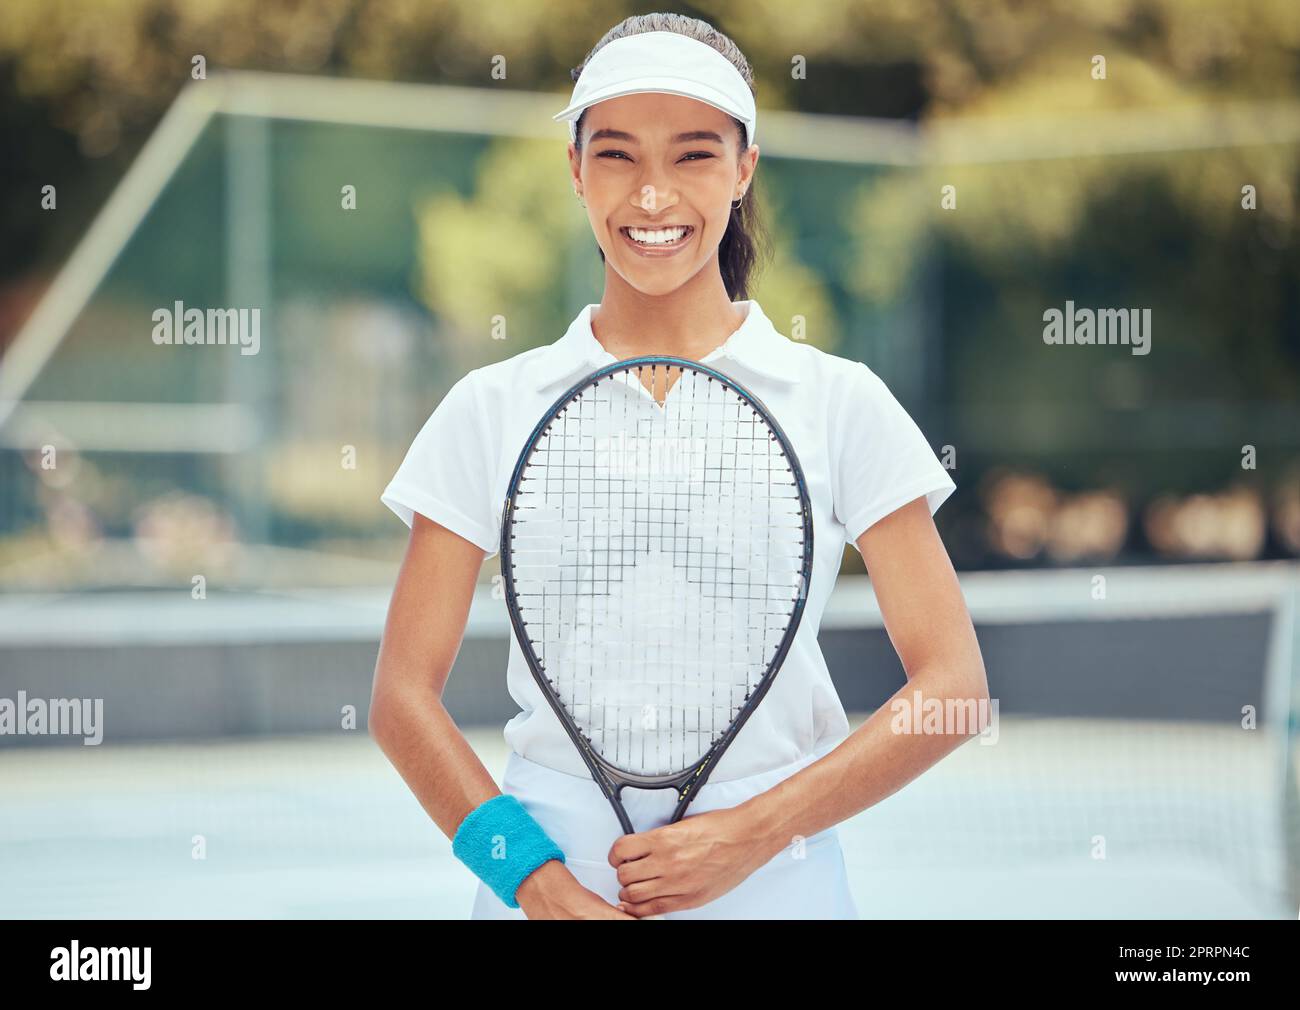 Health, training and tennis player happy and ready for a game outdoors on a tennis court. Professional, athletic and black woman confident while practice skill for competition, sports fun and cardio Stock Photo